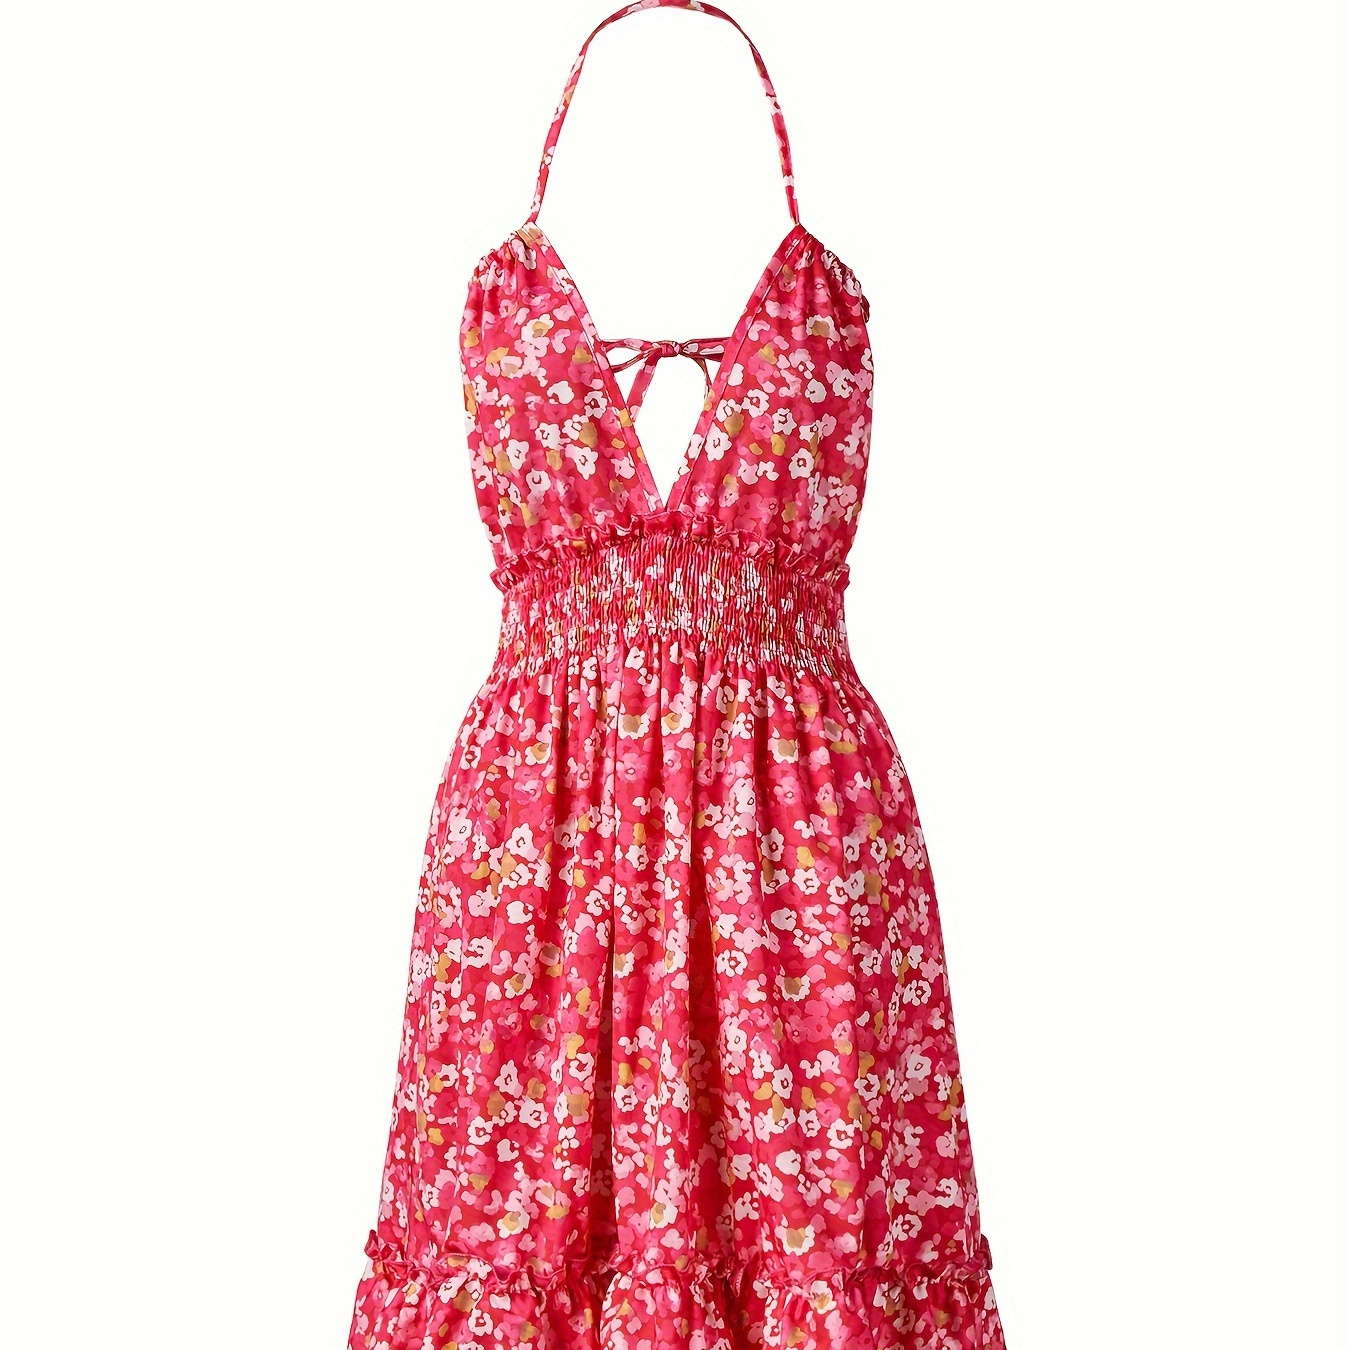 

Floral Print Halter Neck Dress, Sexy Plunging Backless Pleated Dress, Women's Clothing